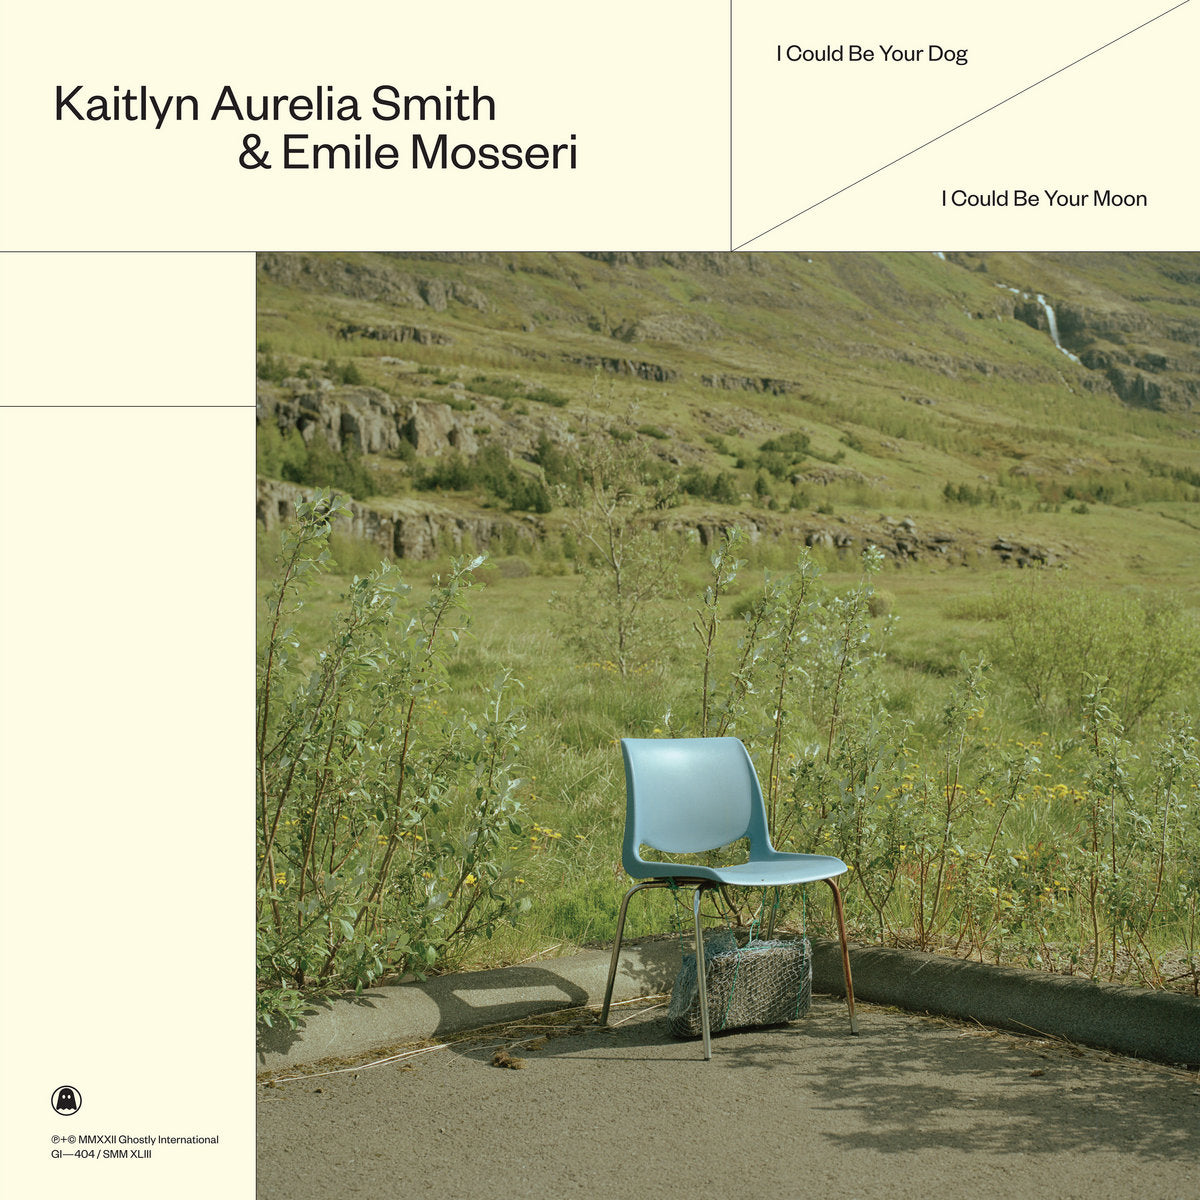 Smith, Kaitlyn Aurelia & Emile Mosseri: I Could Be Your Dog / I Could Be Your Moon (Vinyl LP)